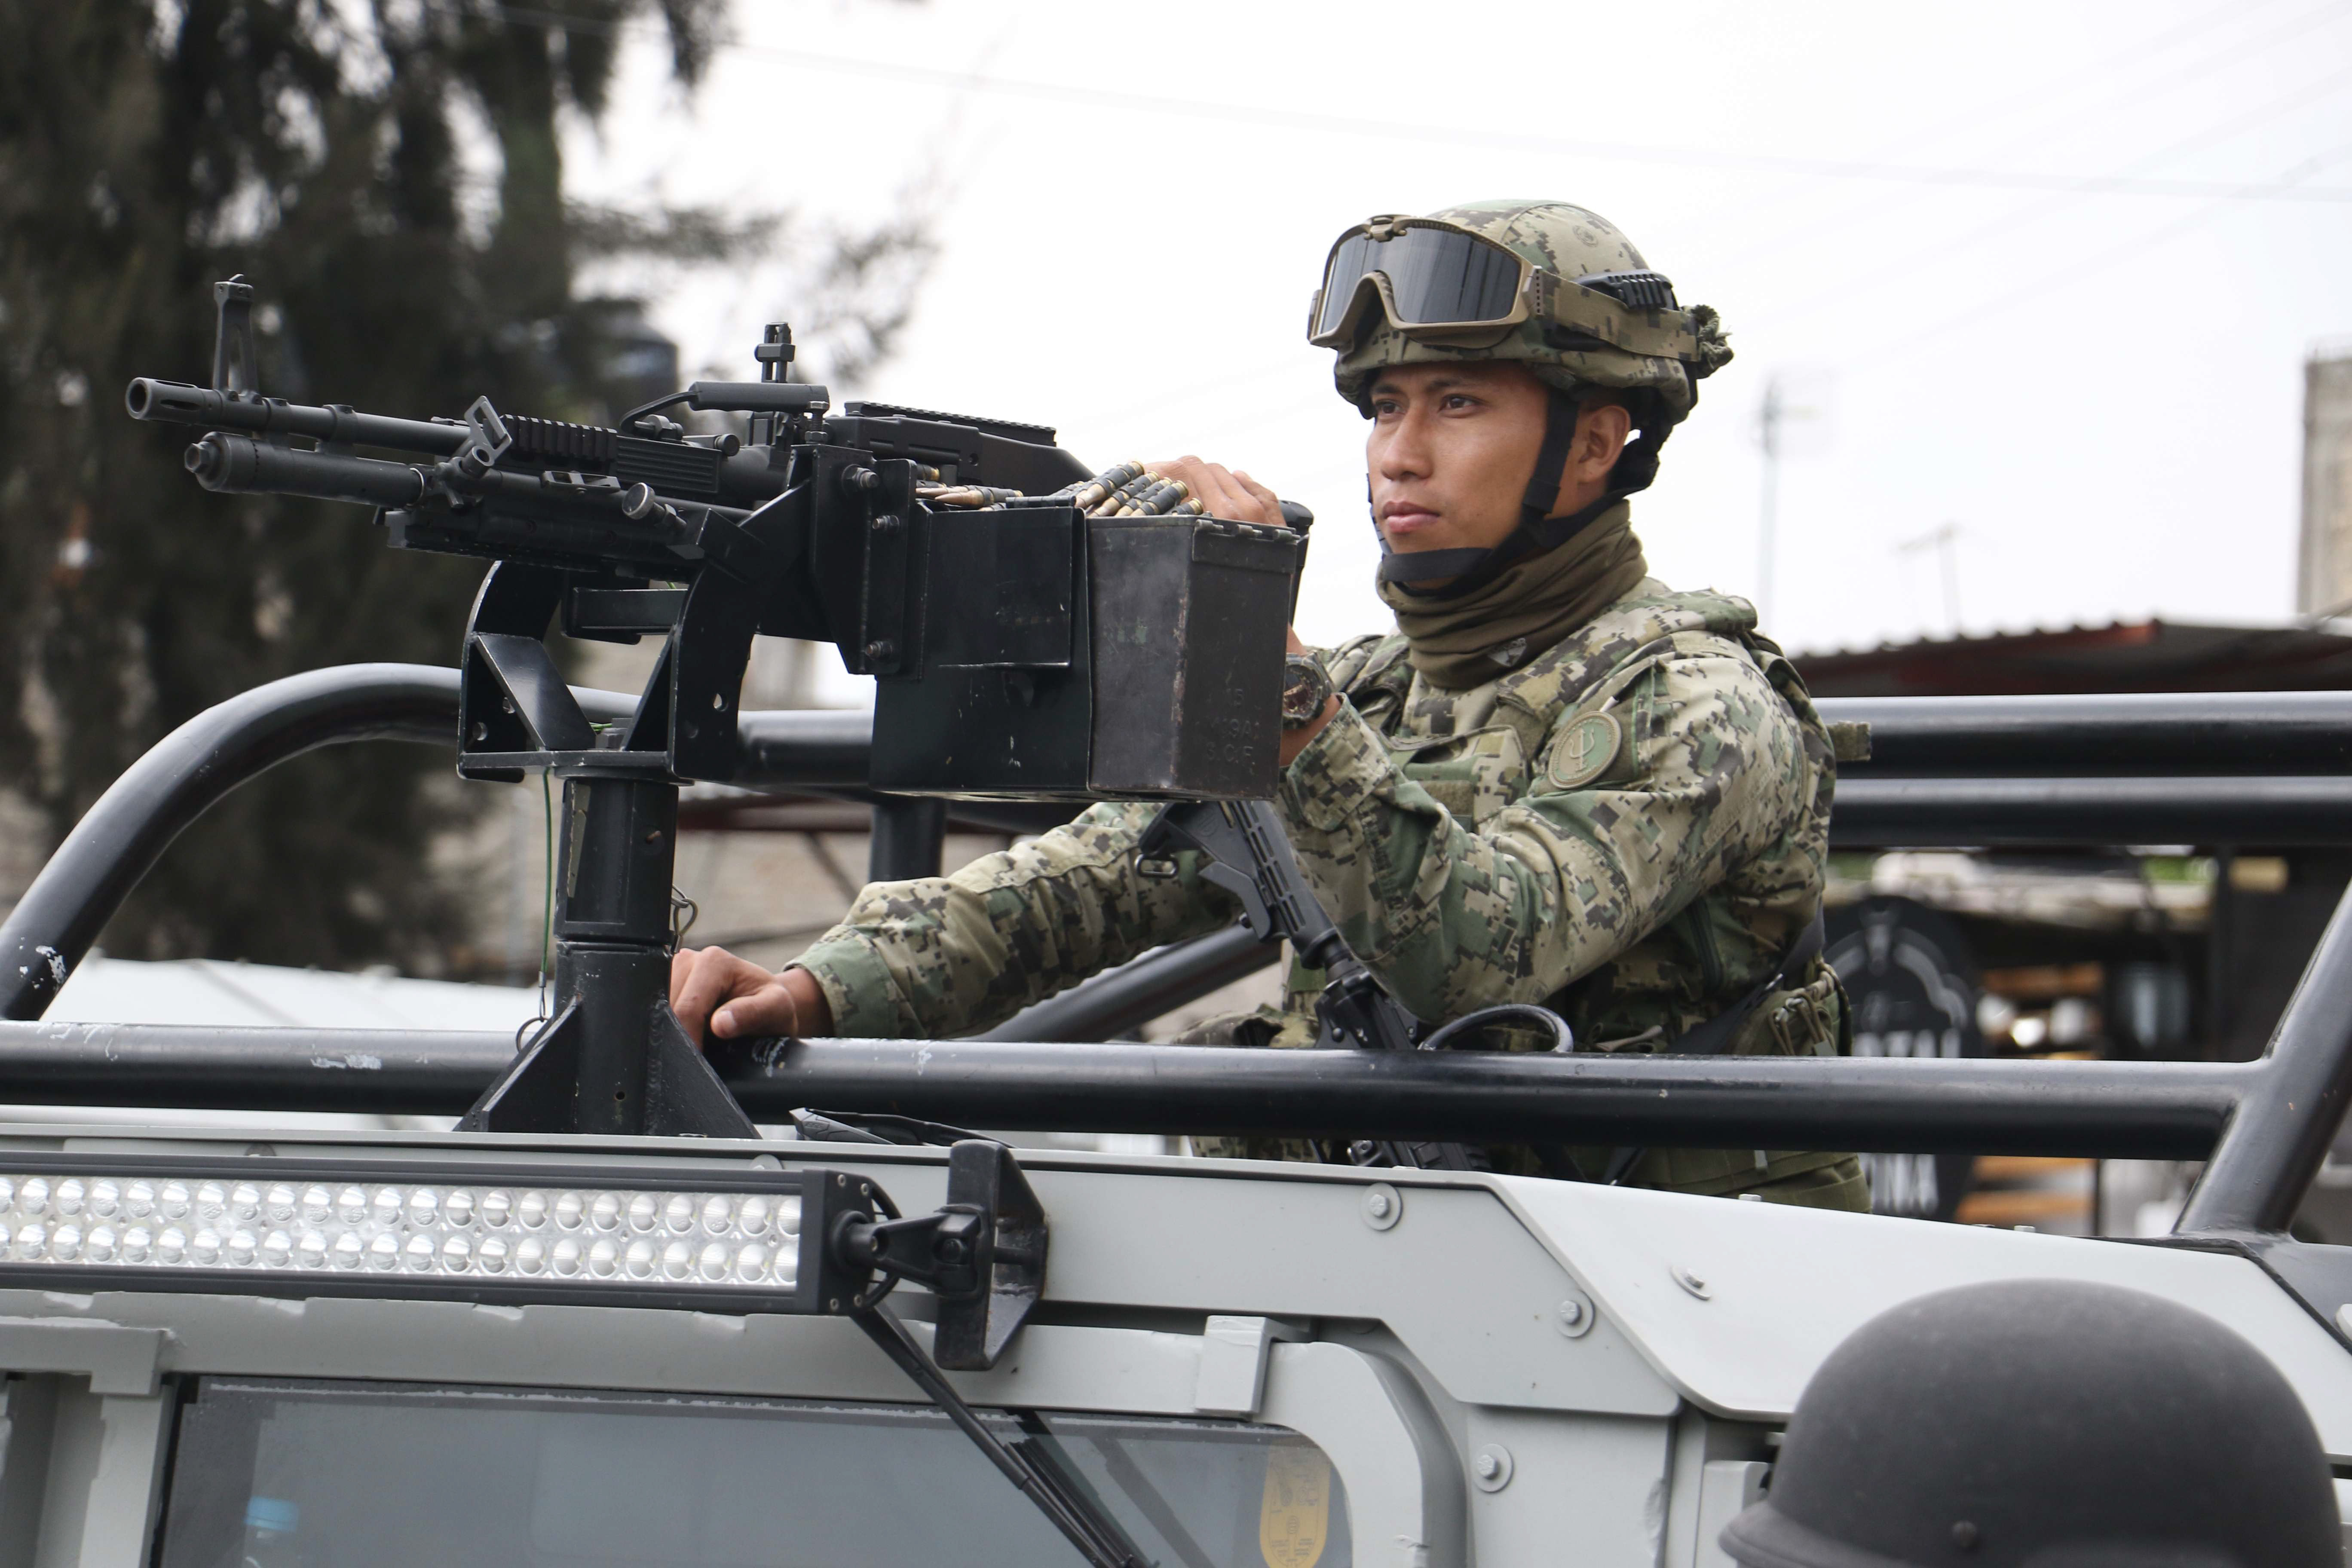 Since April, the UN had issued a recommendation to the federal government to stop the militarization of the country.  (PHOTO: SAÚL LÓPEZ / CUARTOSCURO.COM)